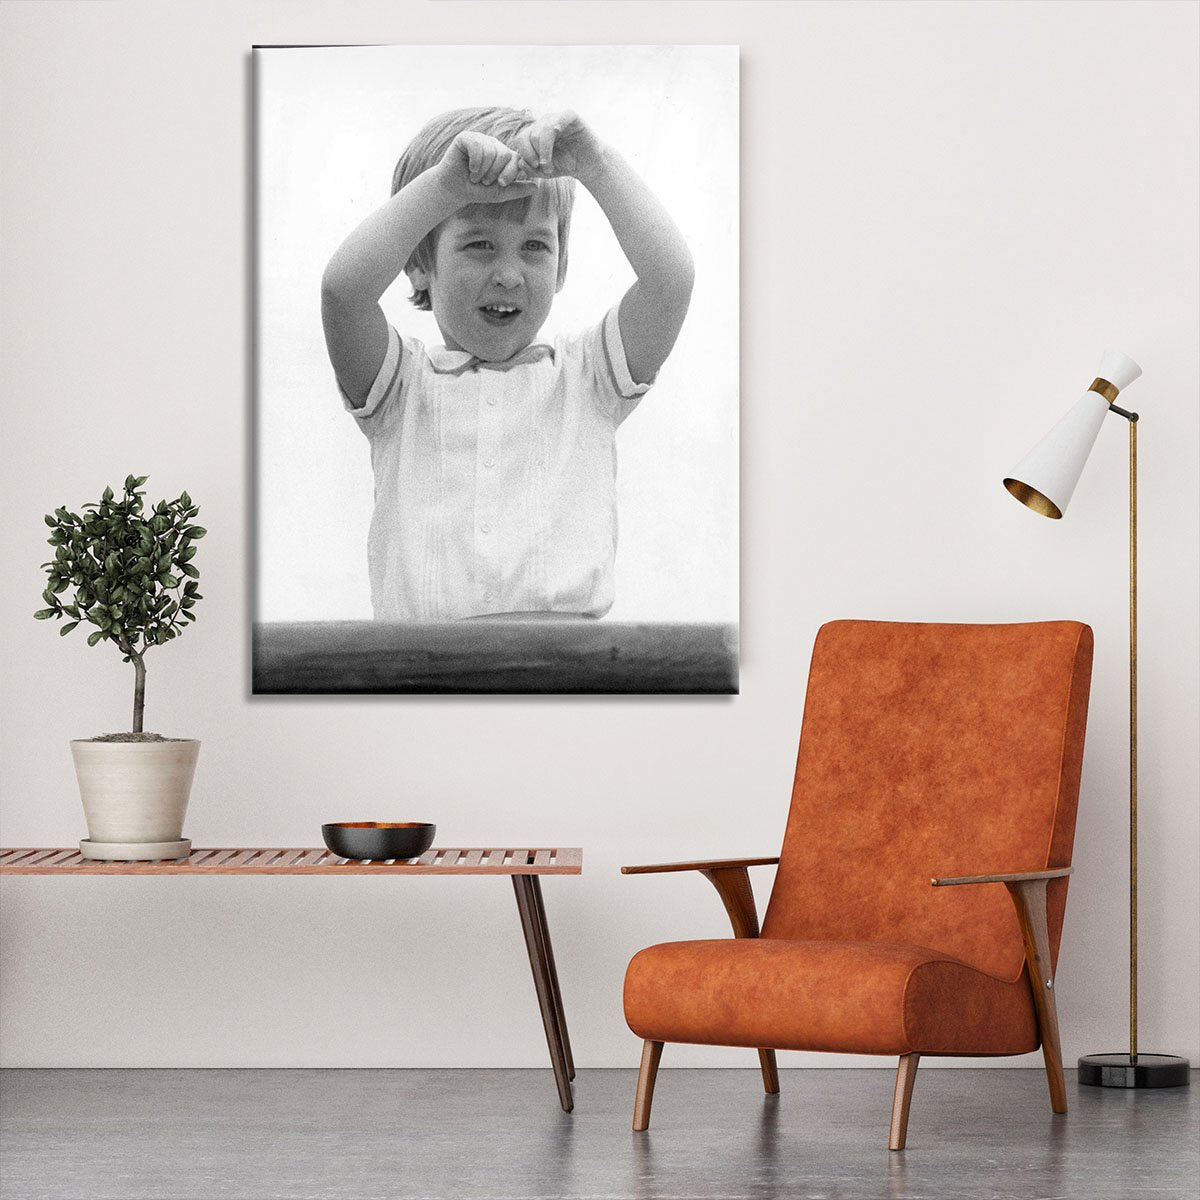 Prince William happily aboard the Royal Yacht Canvas Print or Poster